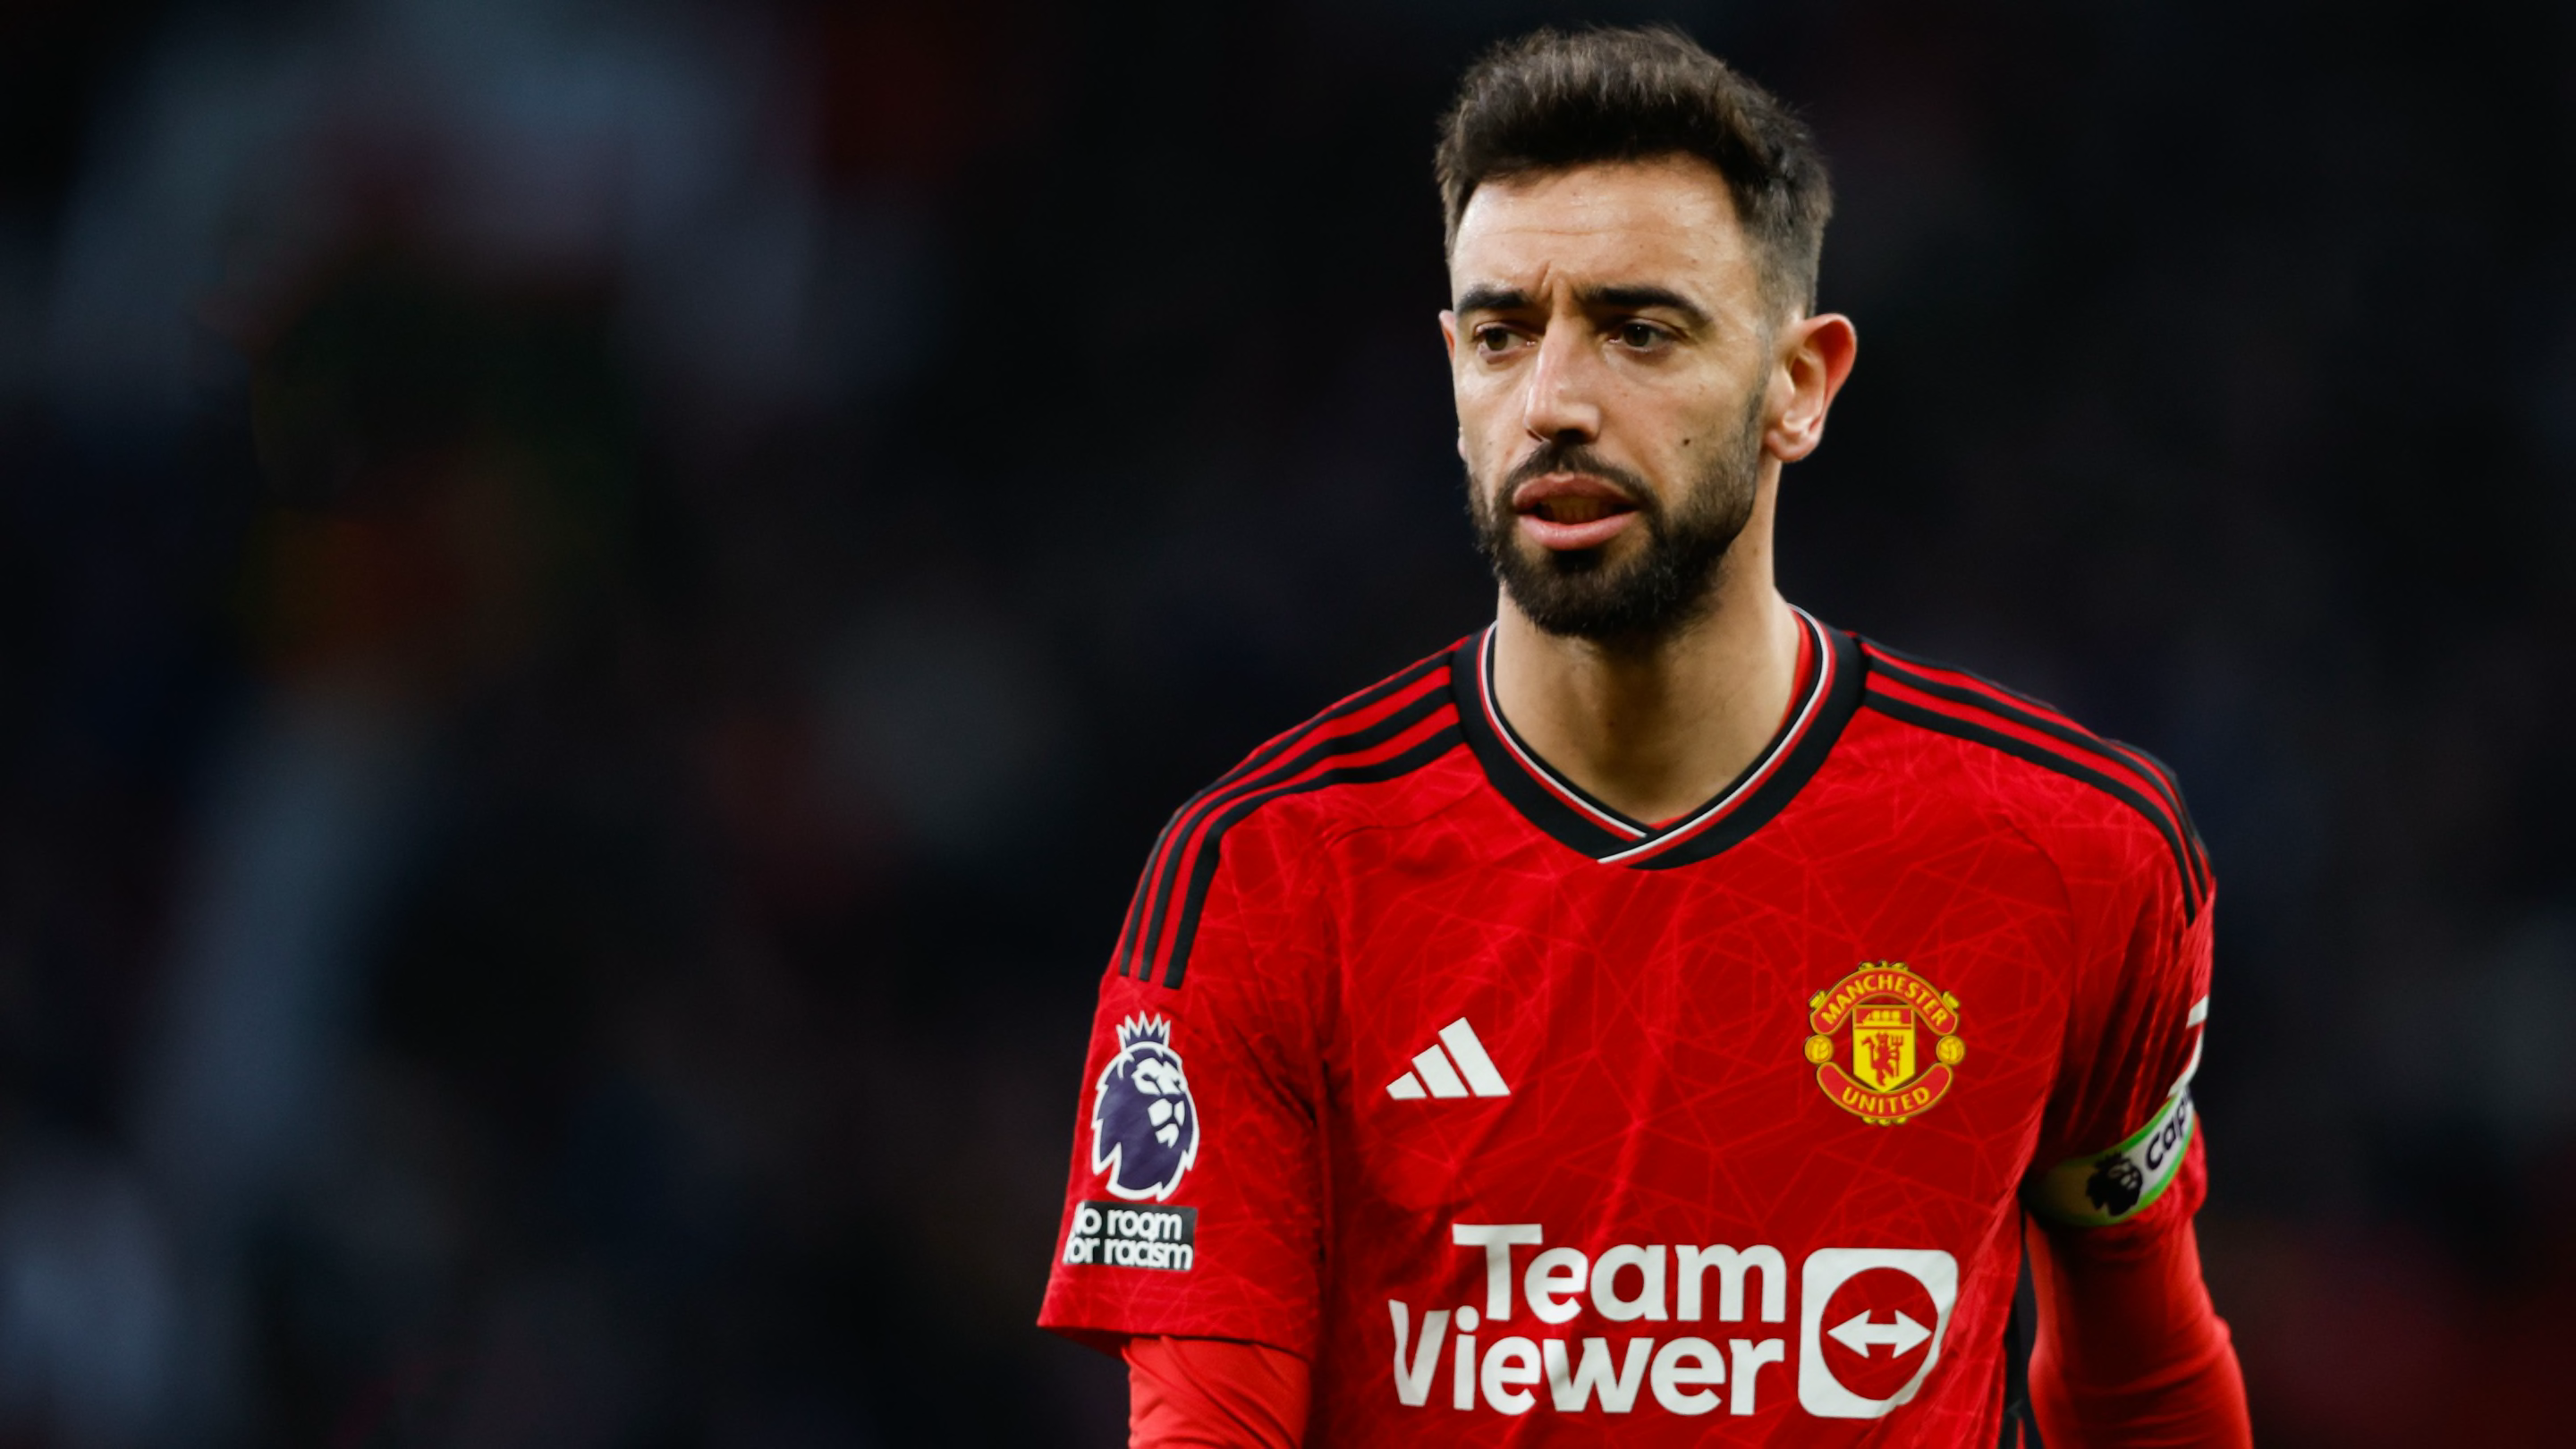 Bruno Fernandes' agent 'holds talks with several clubs' ahead of Man Utd exit decision